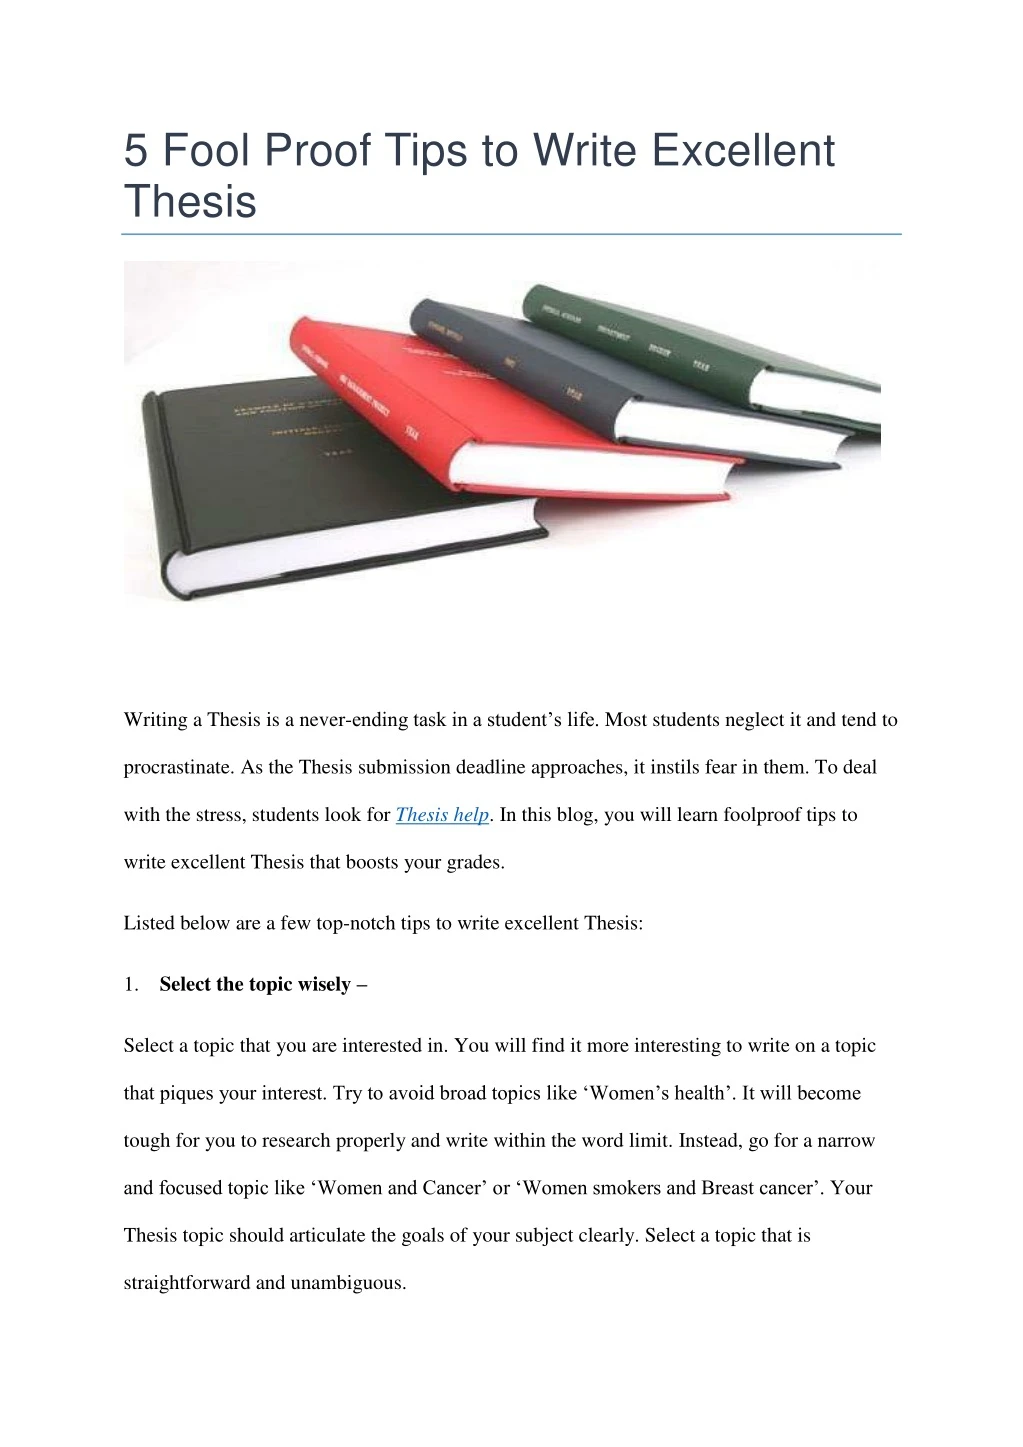 5 fool proof tips to write excellent thesis